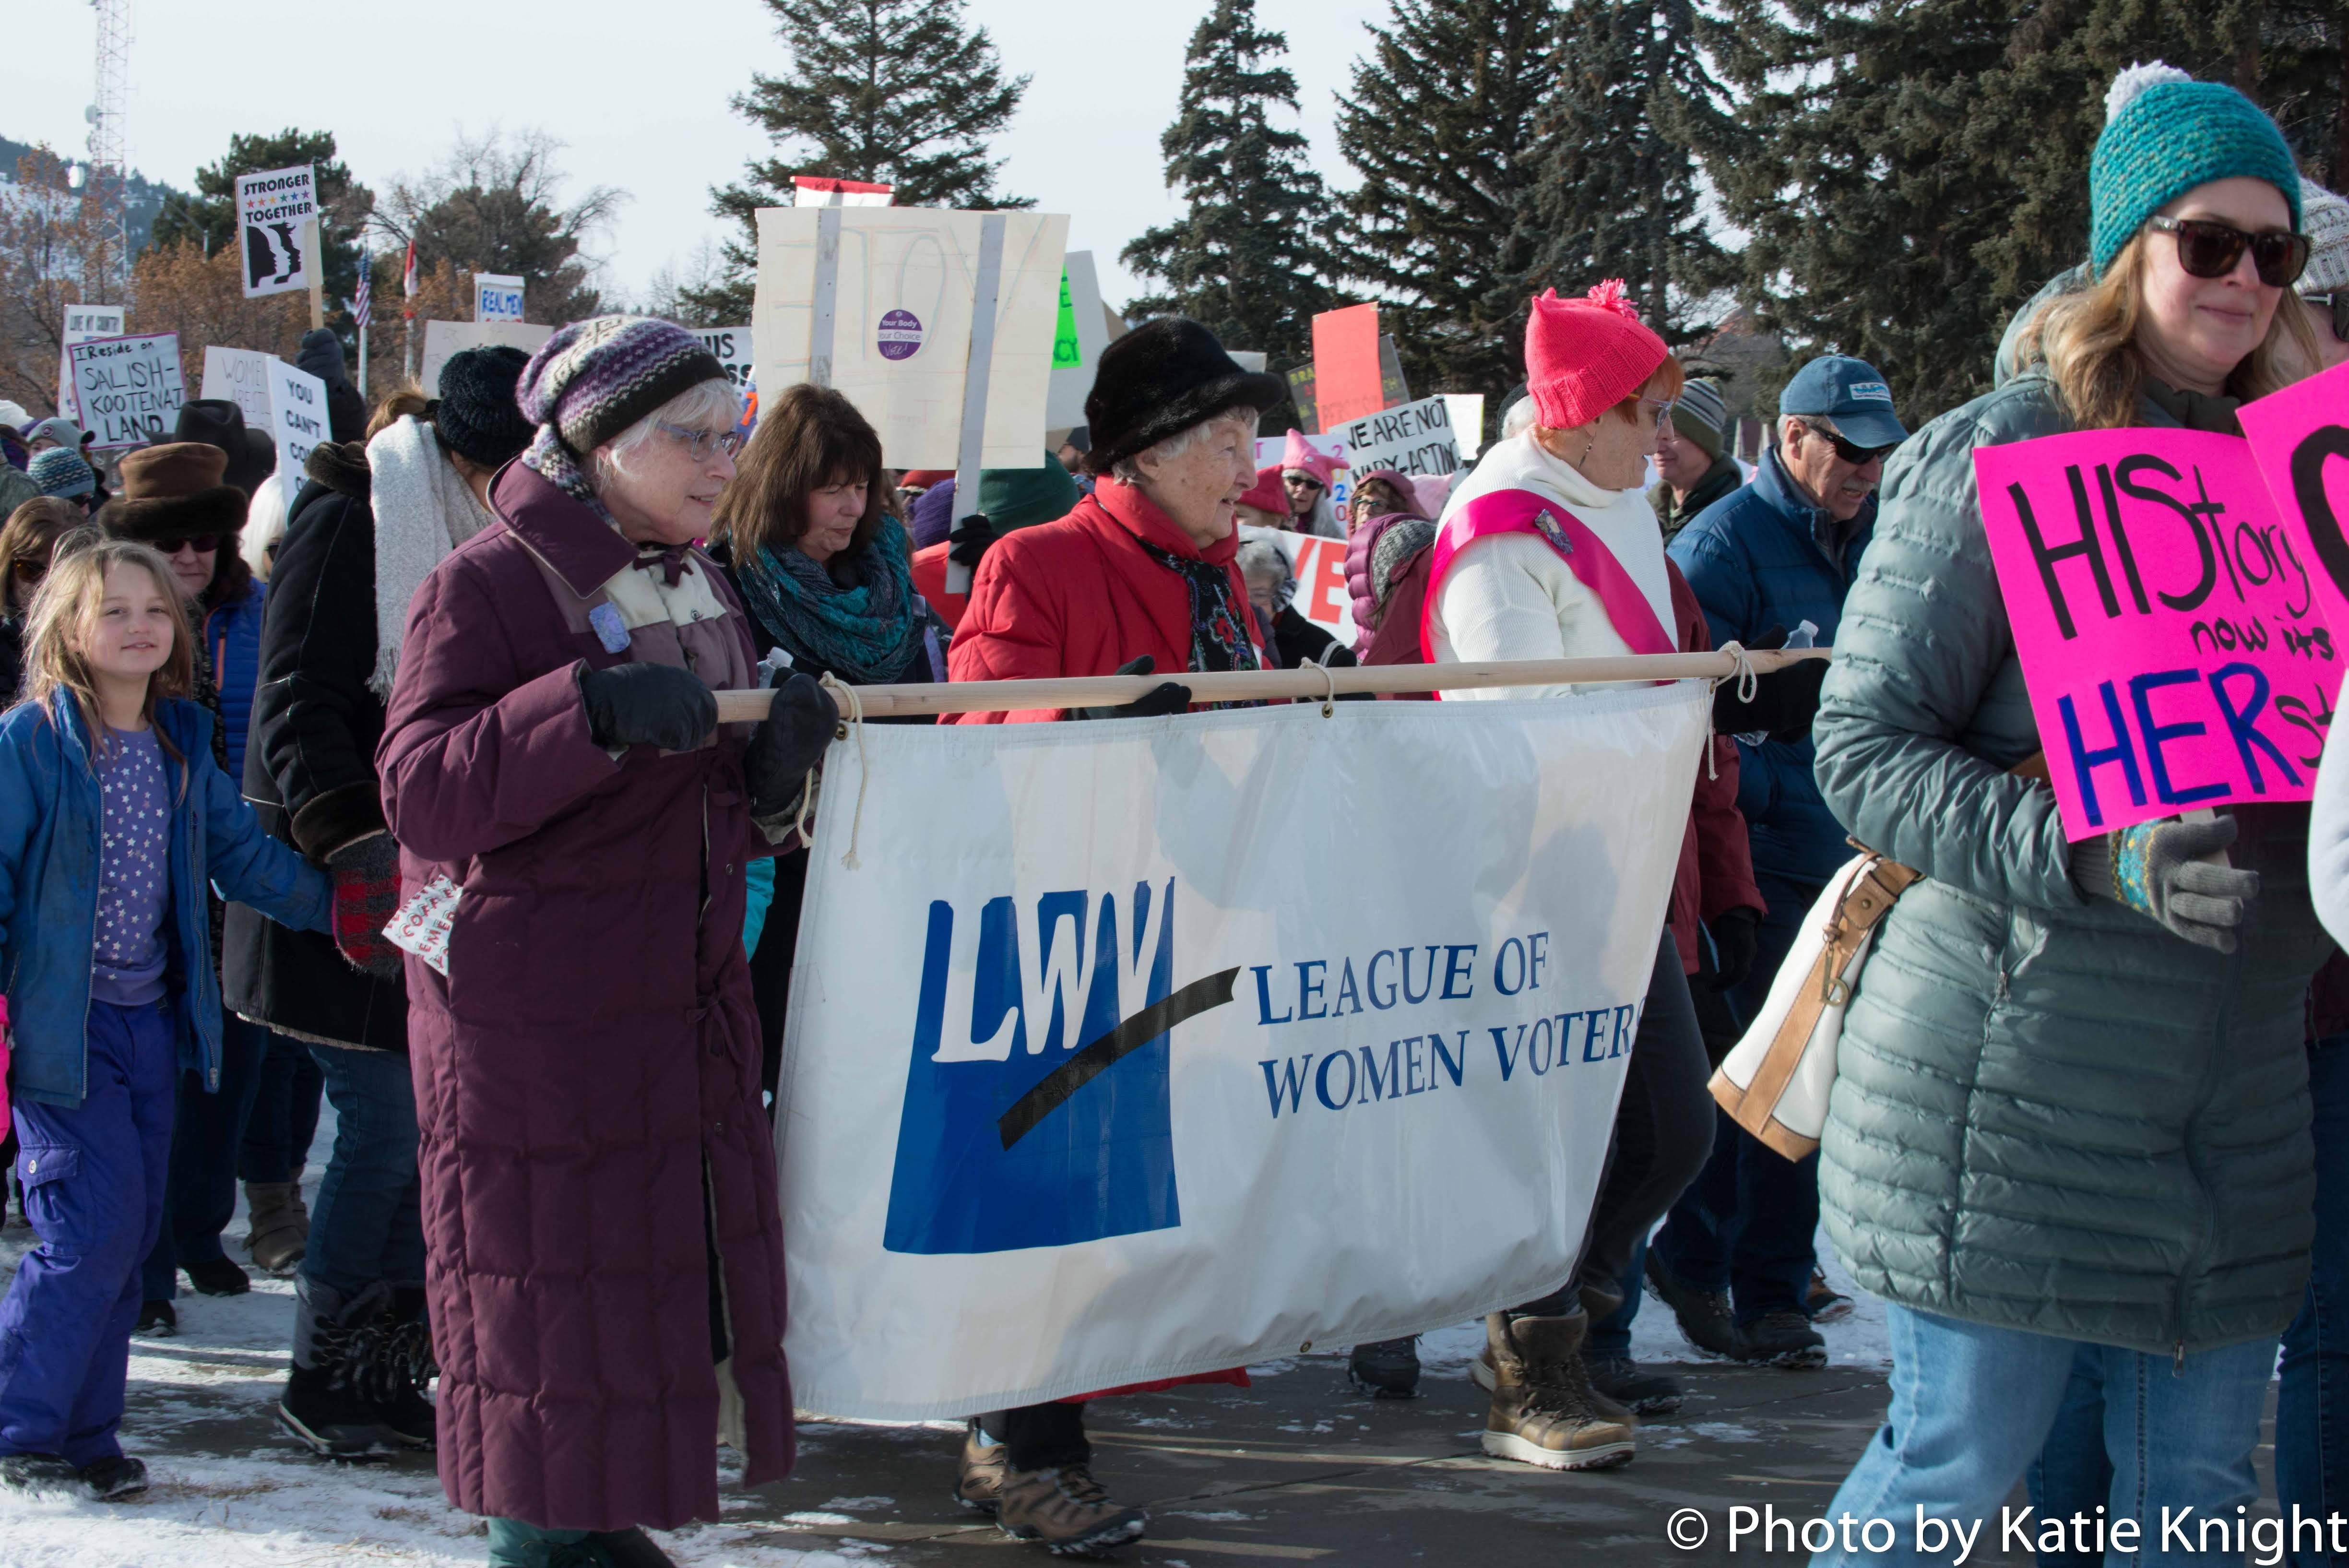 image of three women holding League of Women Voters banner and marching 